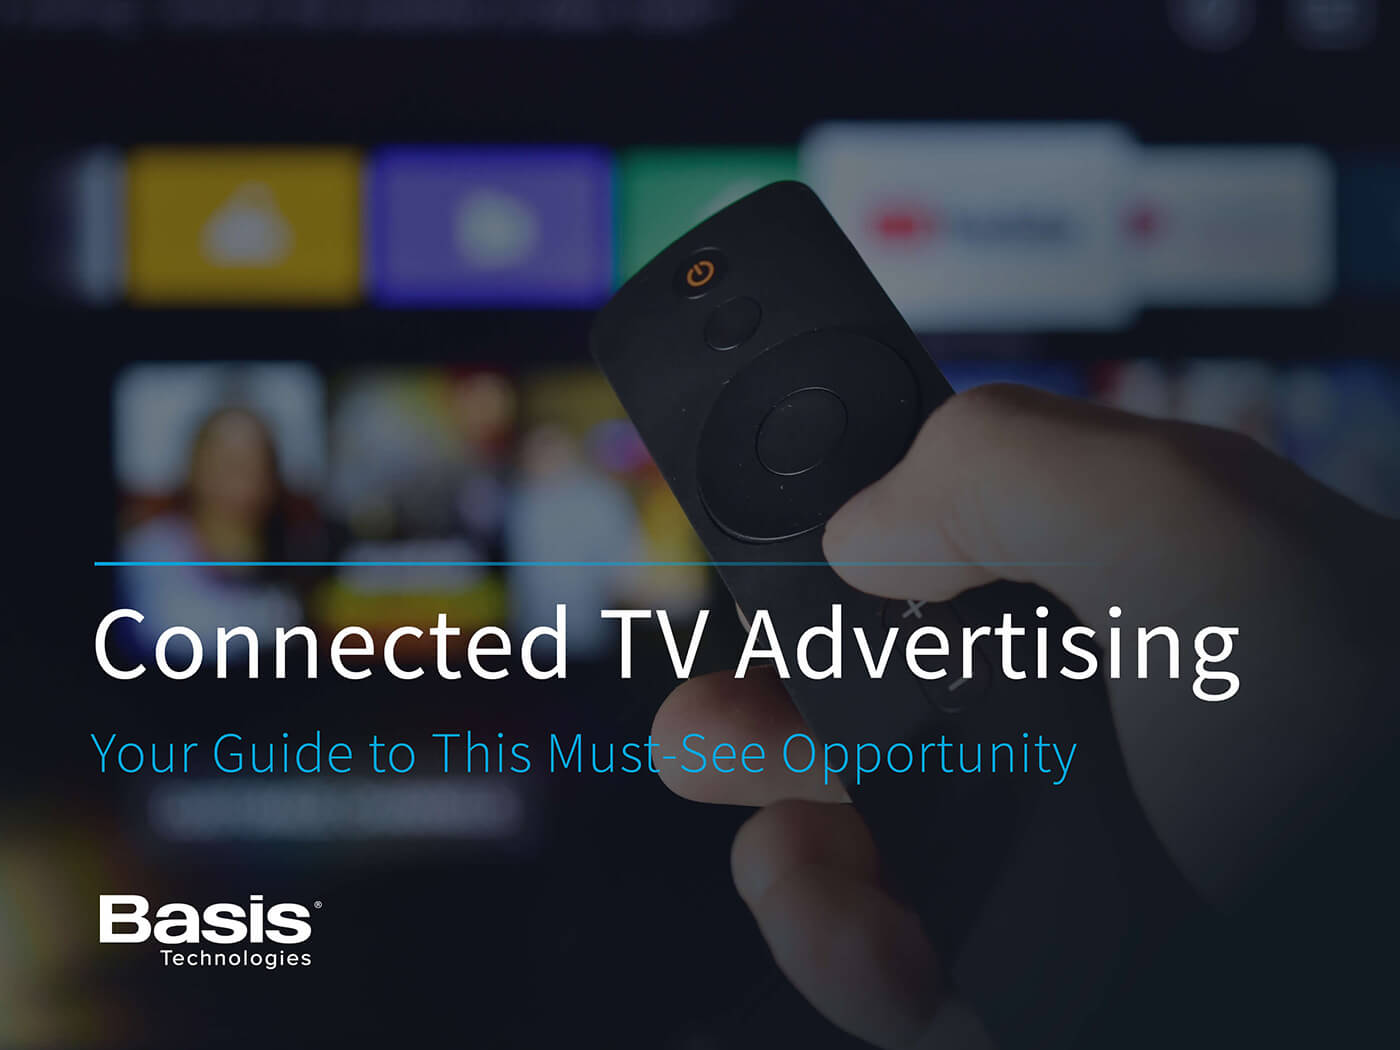 Connected TV Advertising guide cover